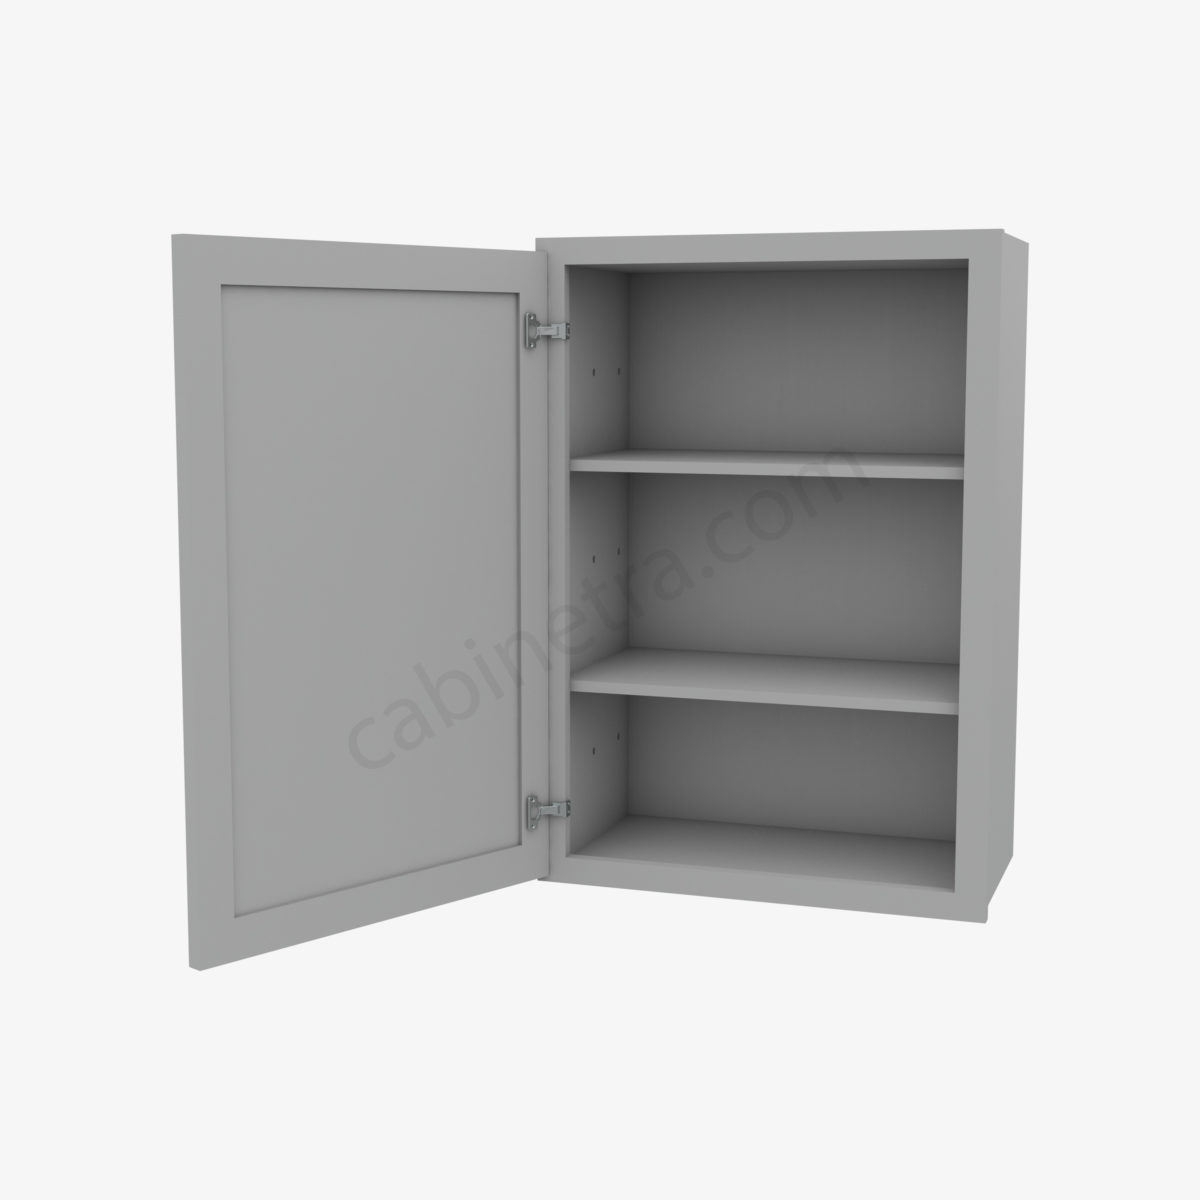 AB W2130 5 Forevermark Lait Gray Shaker Cabinetra scaled